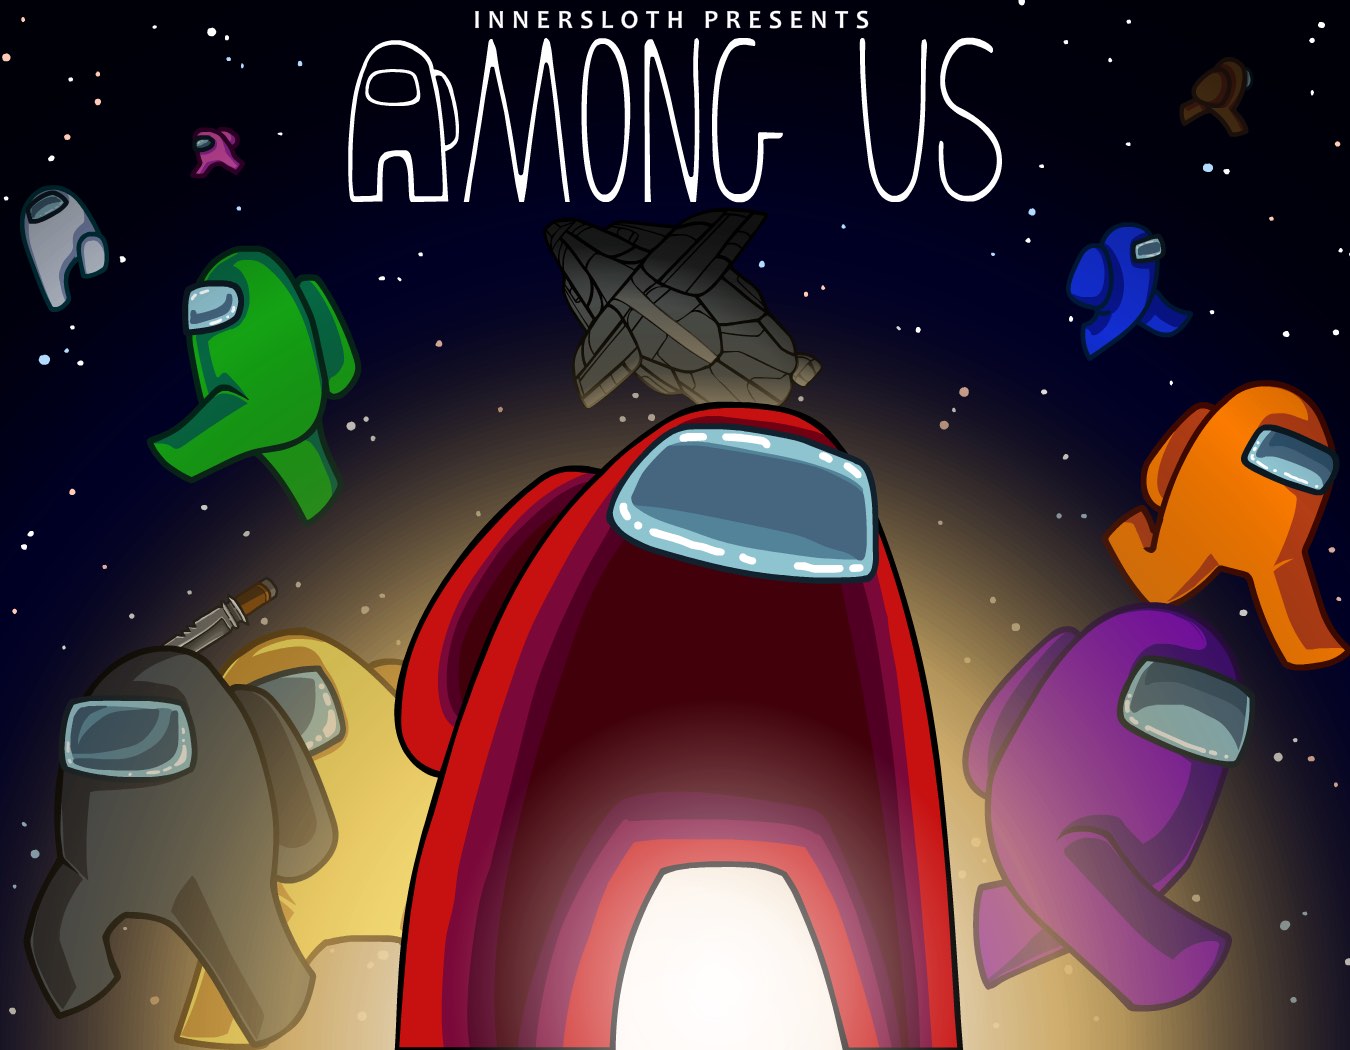 Among Us artwork. A group of bean-shaped astronaut characters standing in front of a space background.